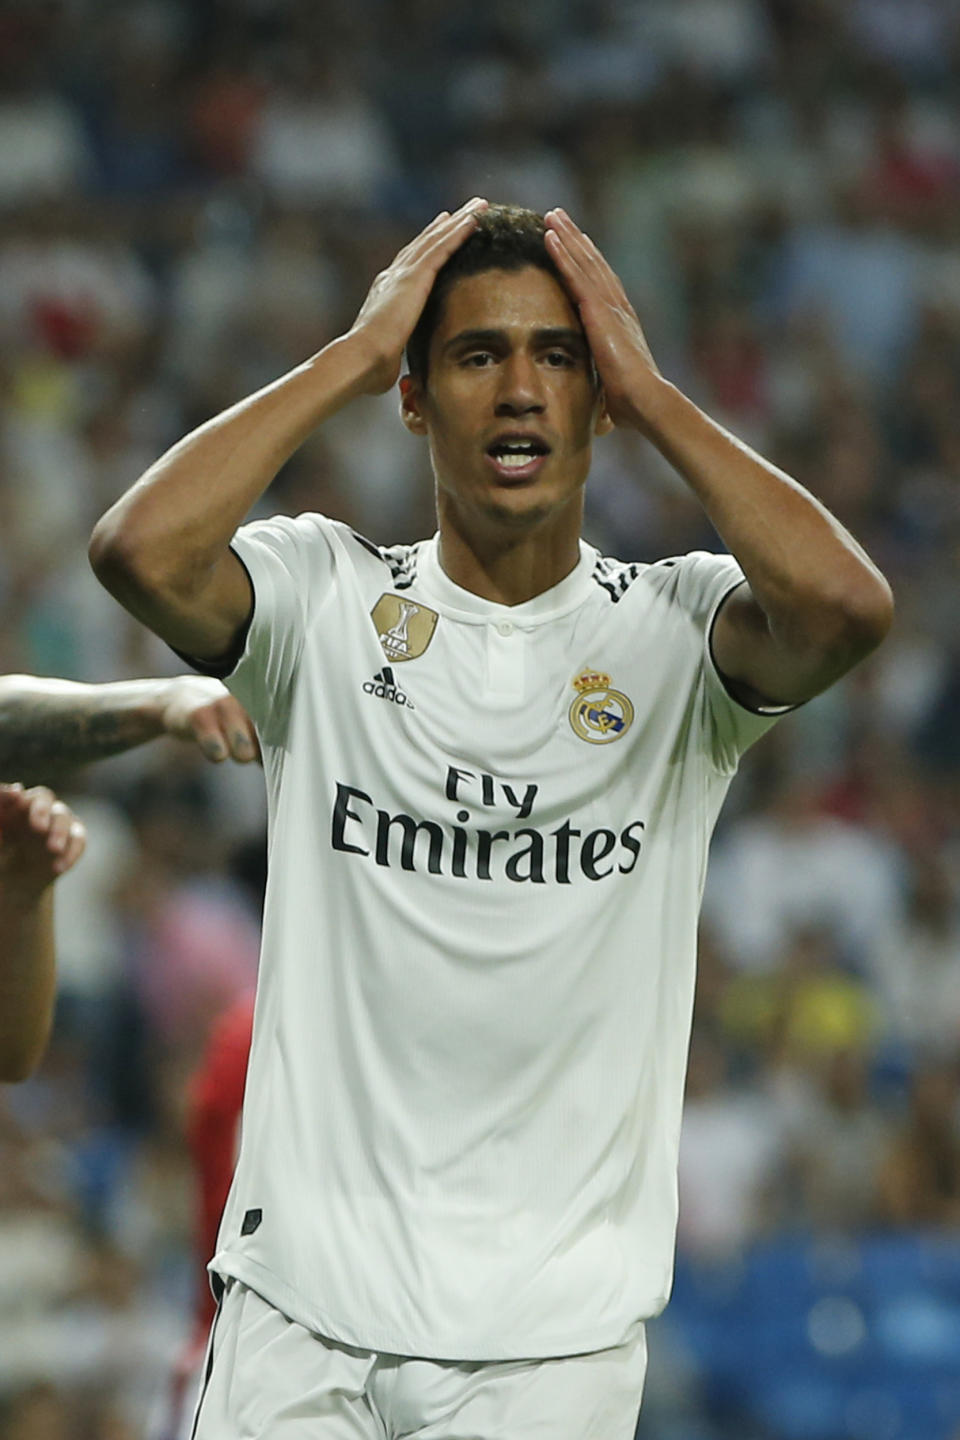 Real Madrid's Raphael Varane gestures after missing a chance during a Spanish La Liga soccer match between Real Madrid and Atletico Madrid at the Santiago Bernabeu stadium in Madrid, Spain, Saturday, Sept. 29, 2018. The match ended in a 0-0 draw. (AP Photo/Paul White)